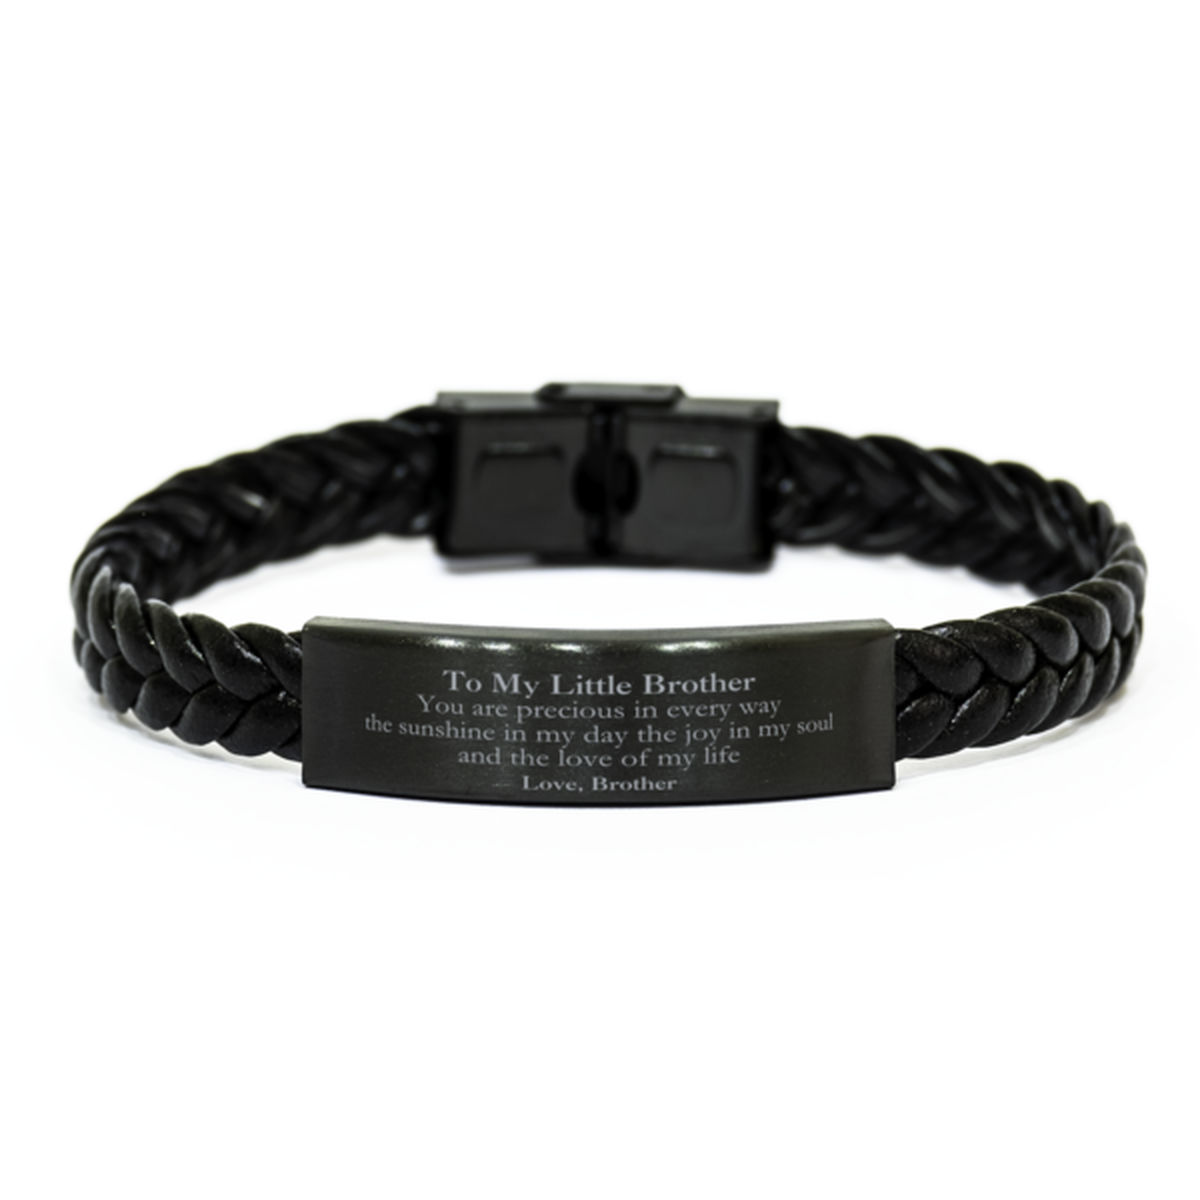 Graduation Gifts for Little Brother Braided Leather Bracelet Present from Brother, Christmas Little Brother Birthday Gifts Little Brother You are precious in every way the sunshine in my day. Love, Brother